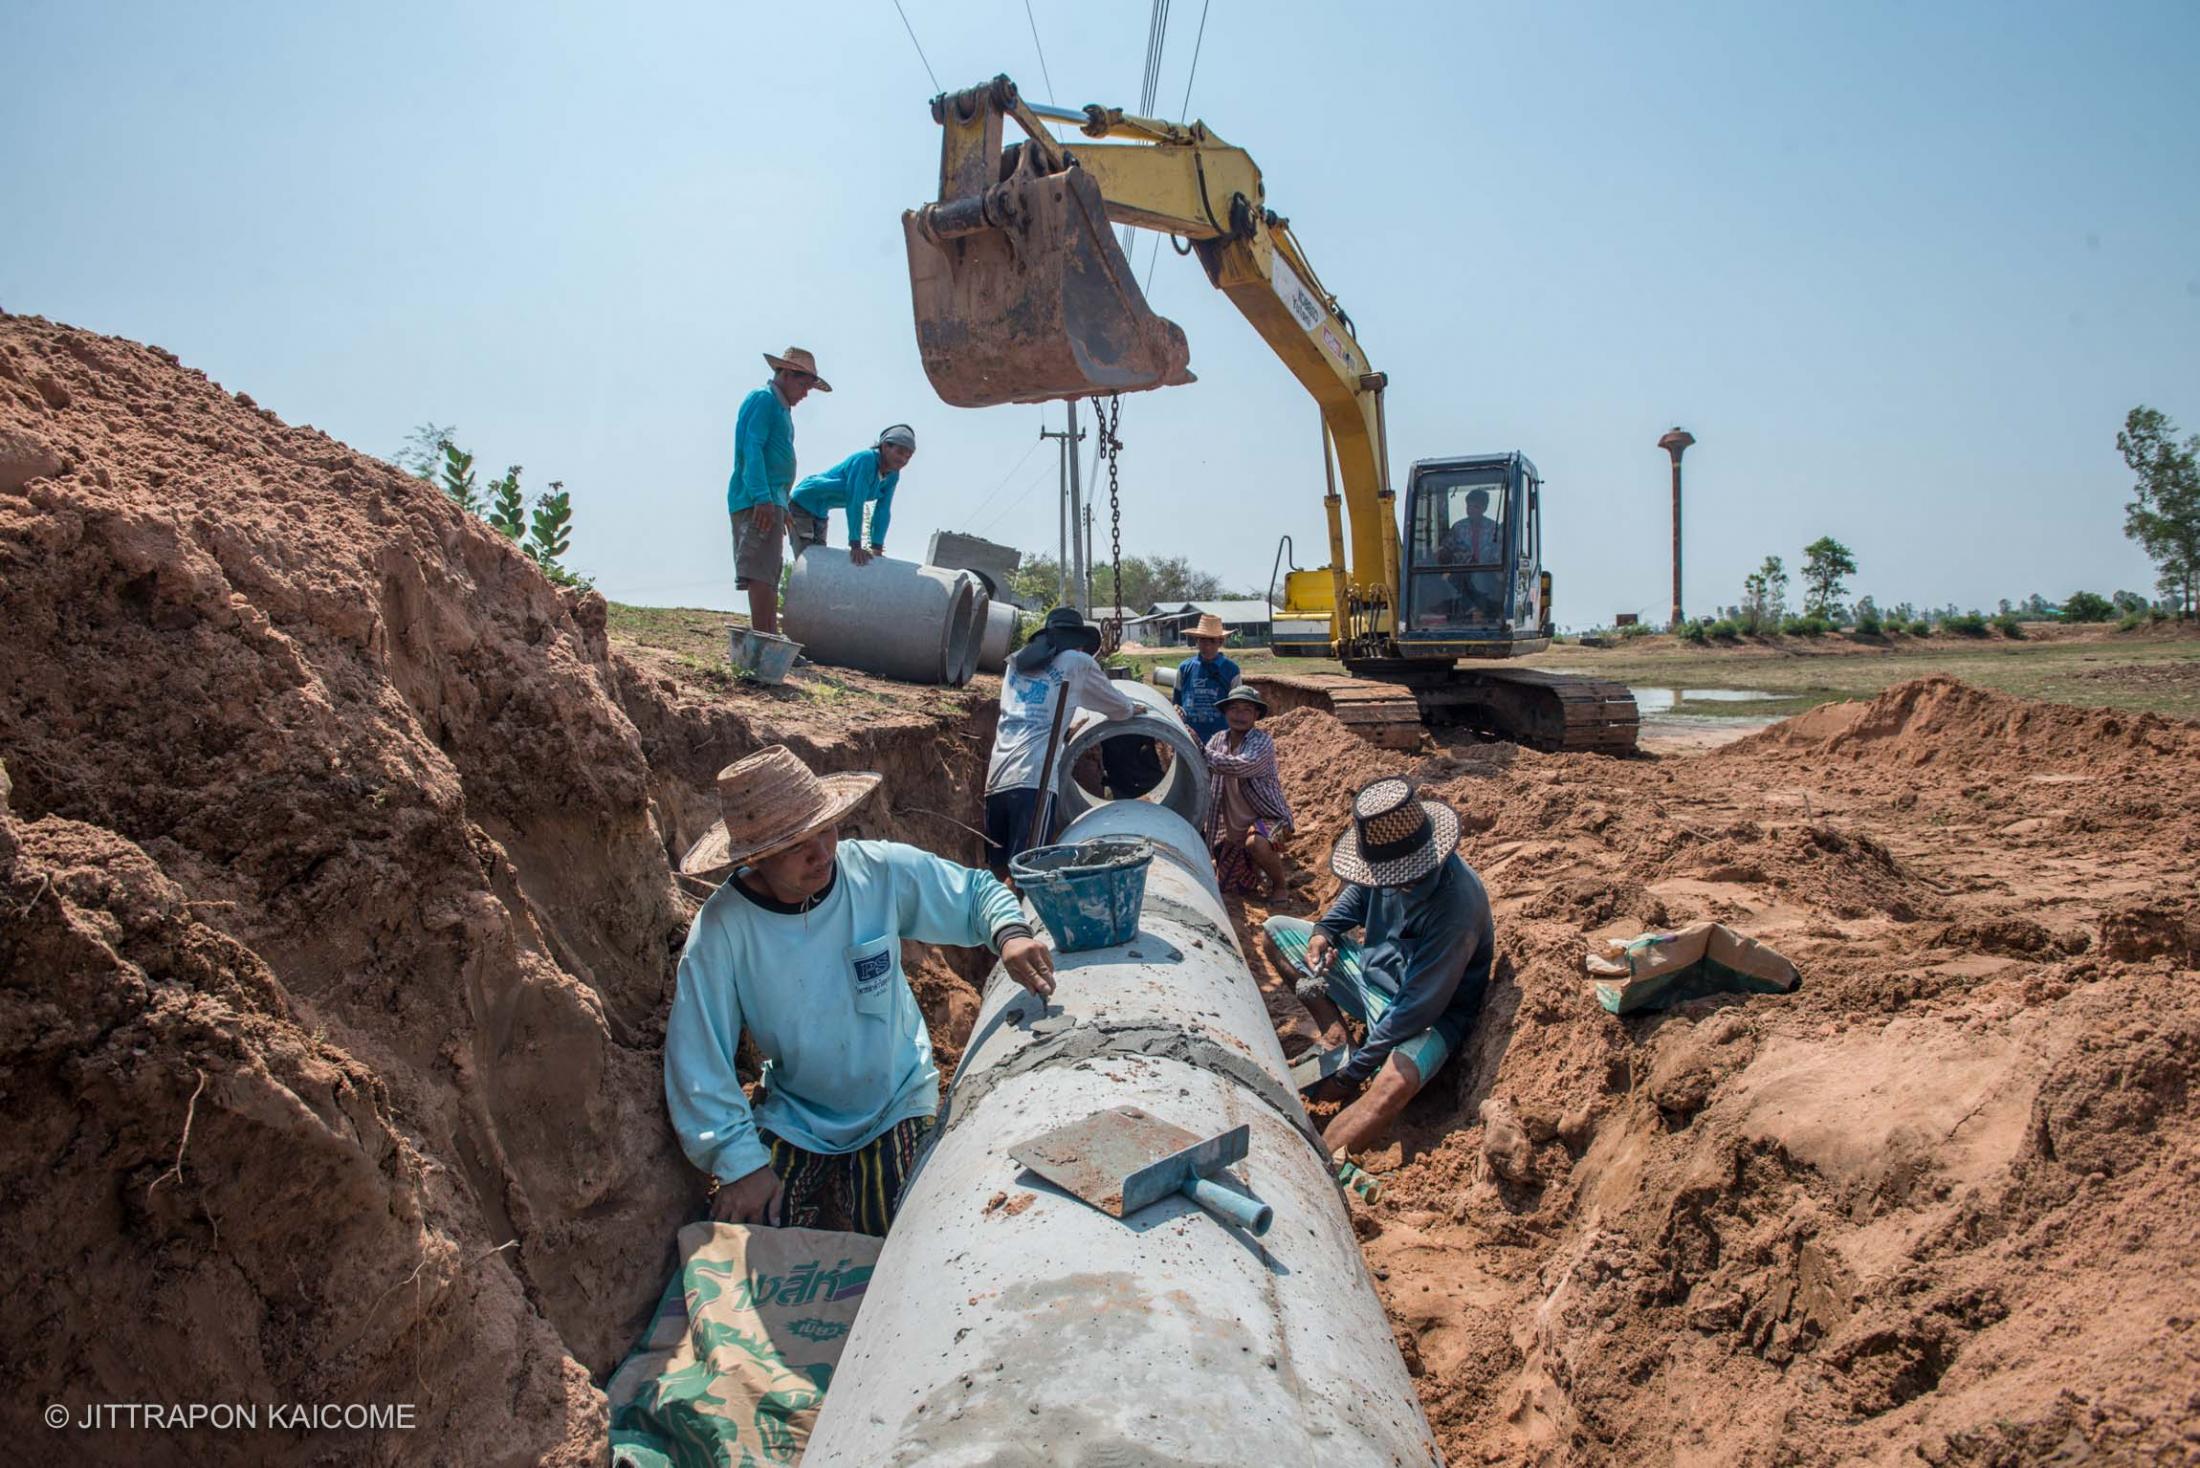 In Roi-Ed province is facing extreme drought causing a lack of water usage in farming and a daily basis. Civilians are trying to build a water supply pipe to connect with the other villages nearby. Thailand on May 06, 2016.